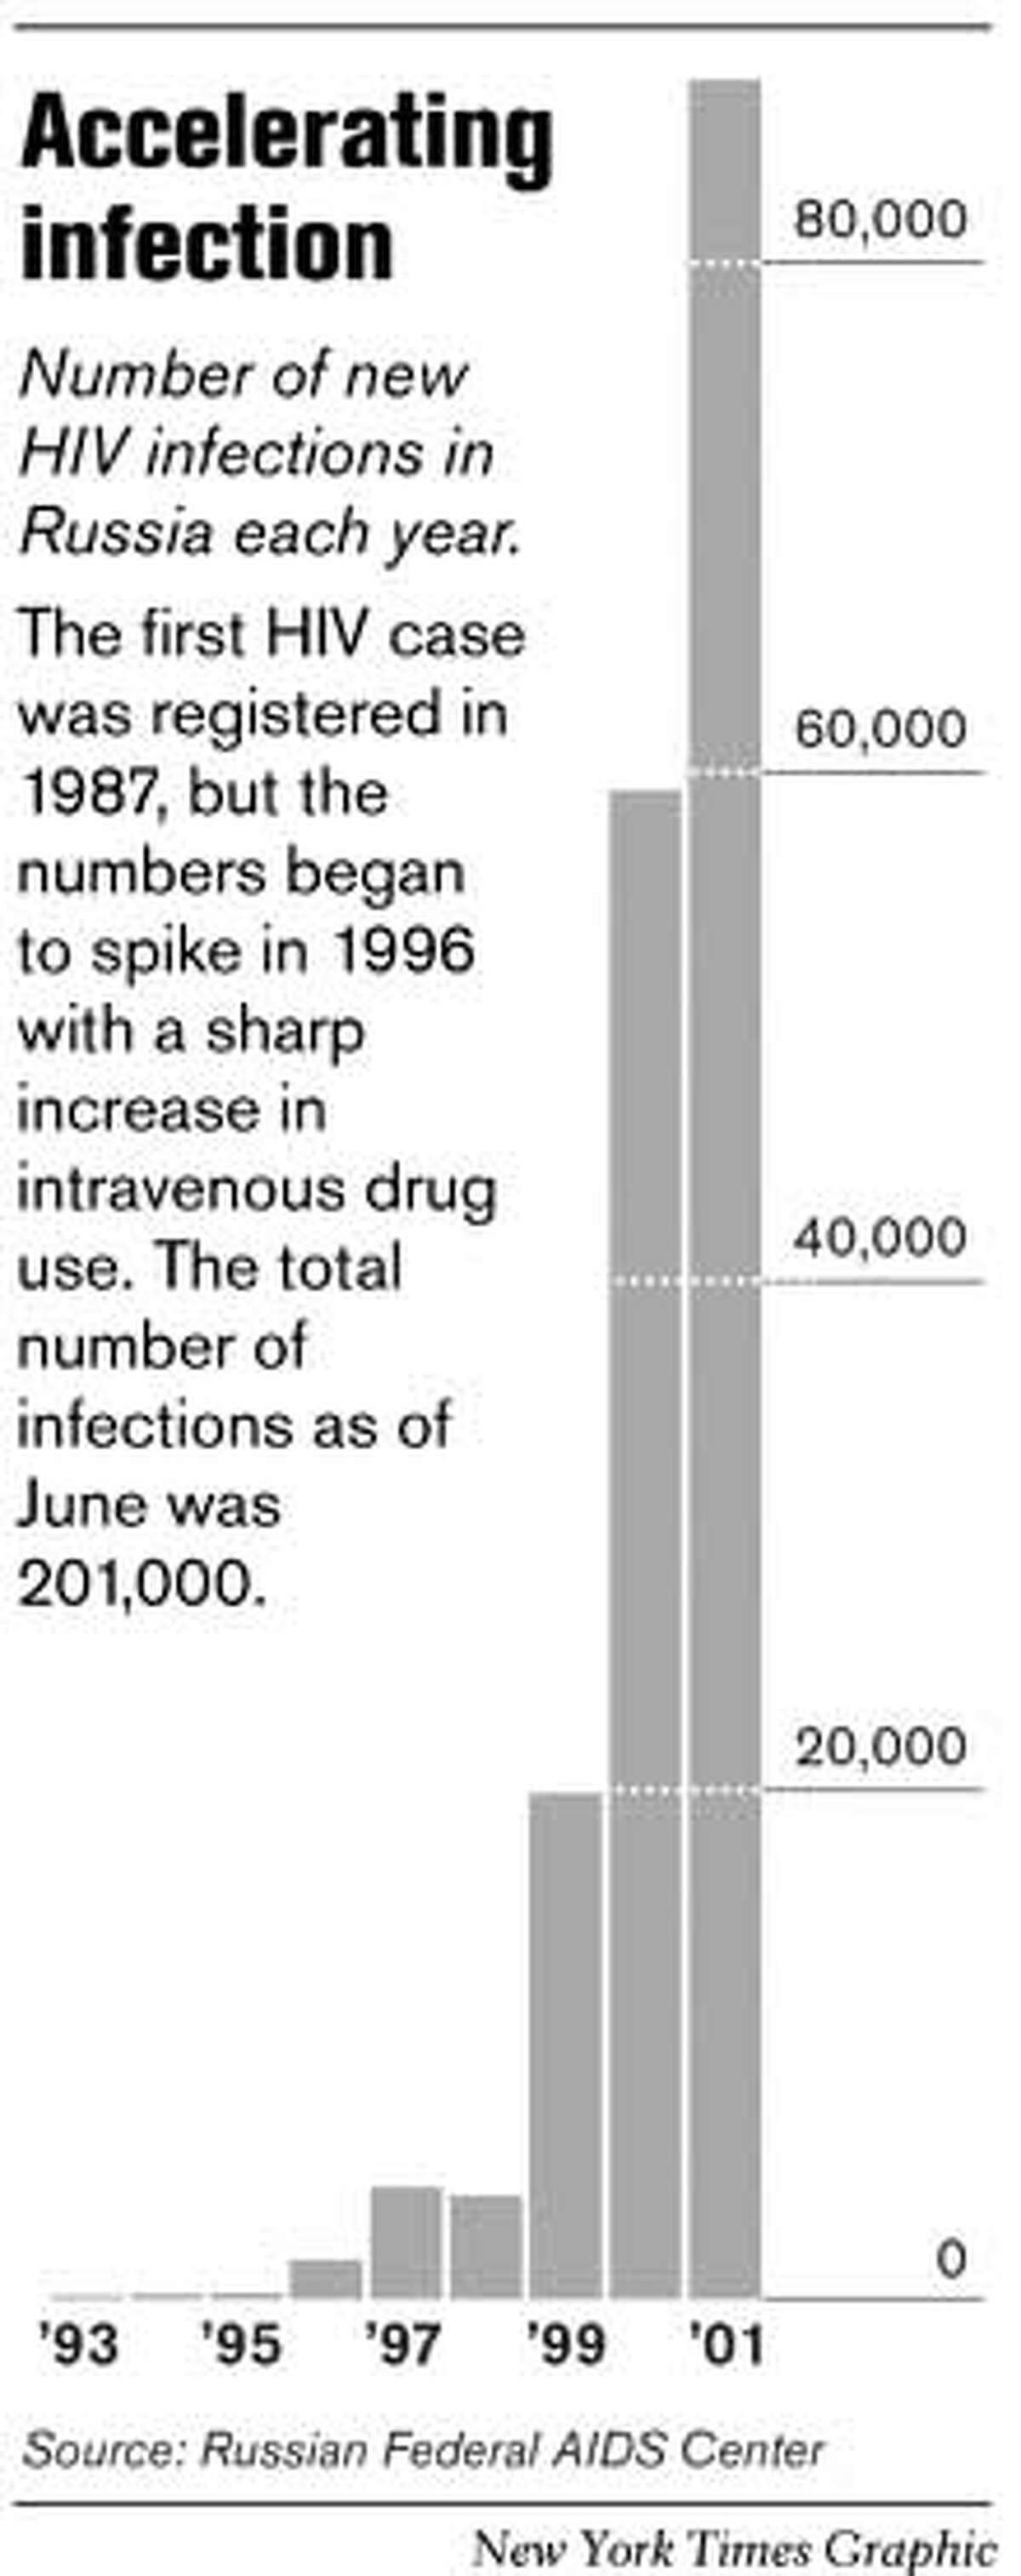 Accelerating Infection. New York Times Graphic